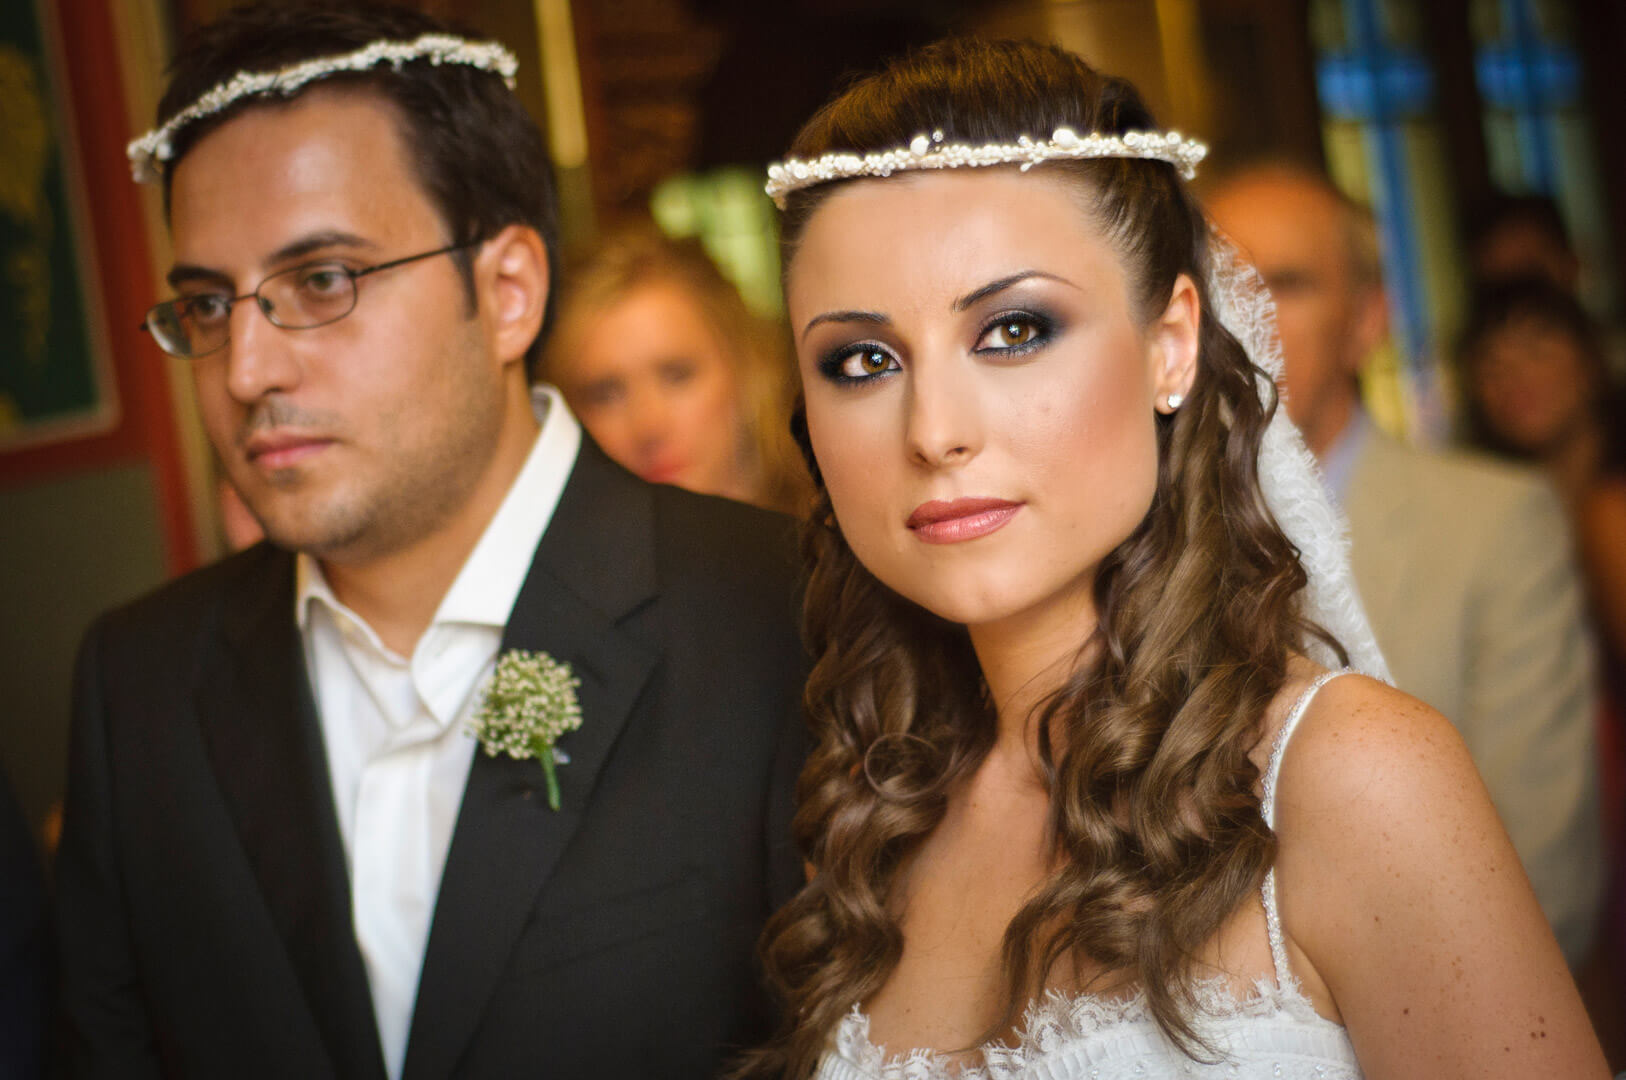 The couple adorned with wedding crowns, the bride wearing a dreamy expression, creating a magical and enchanting scene